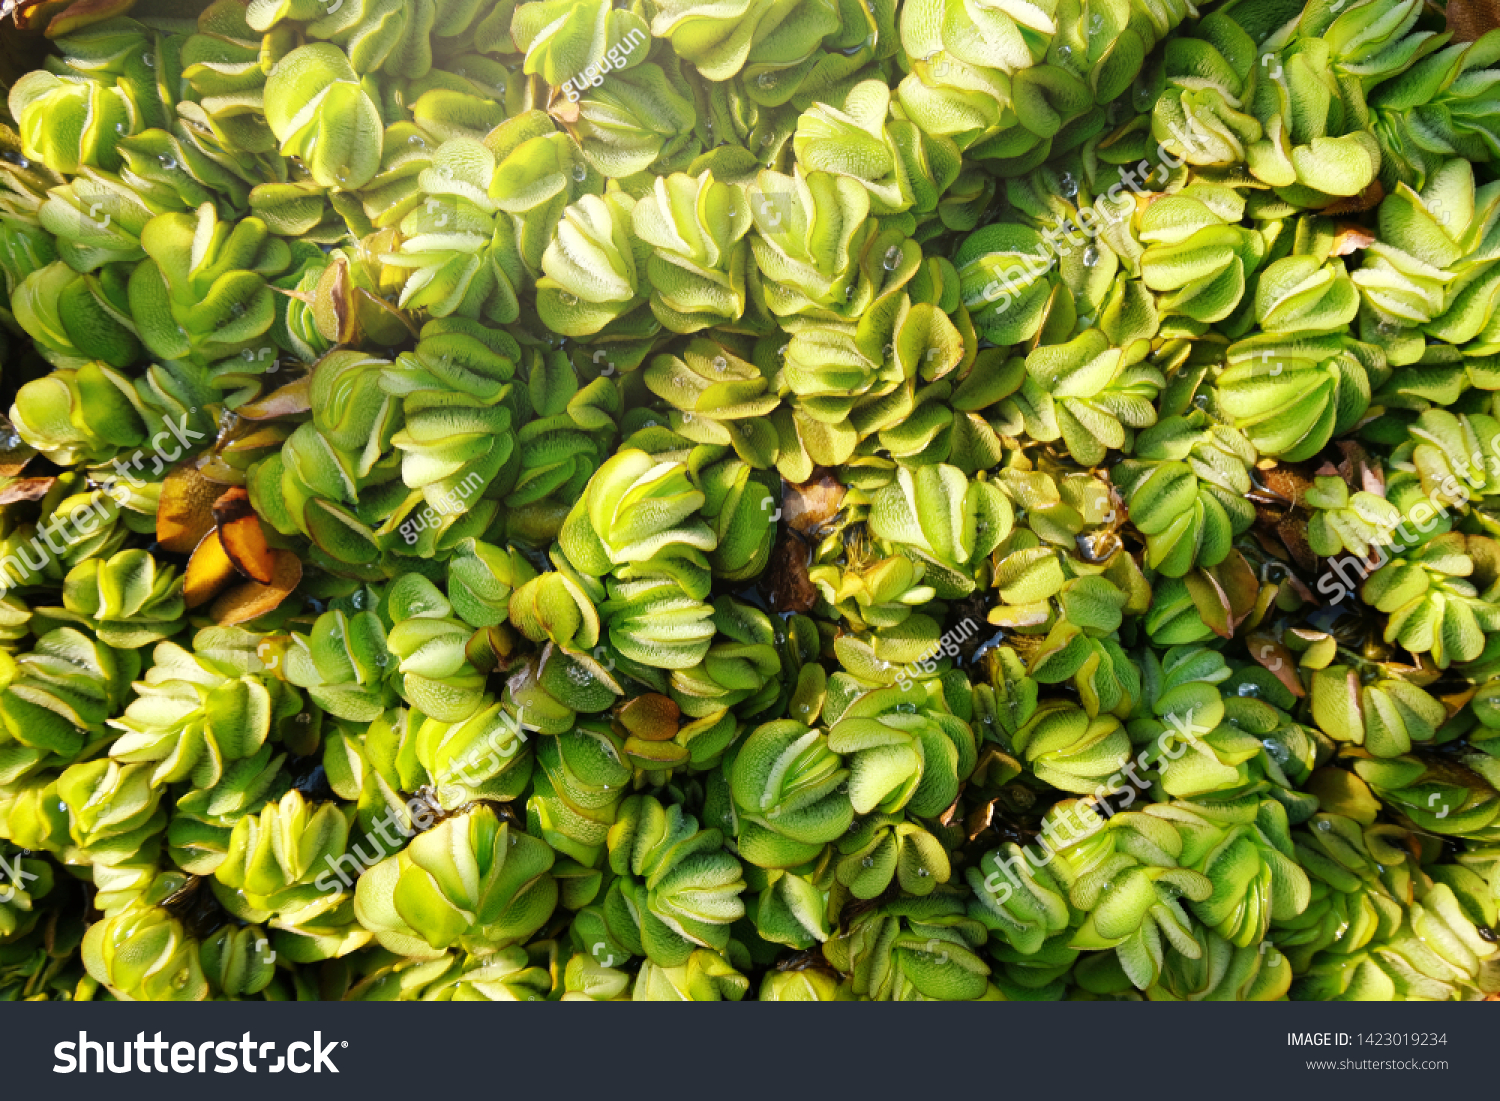 Floating plants in the pond, top view.Water lettce / aquatic weed/ aquatic plant for decoration #1423019234